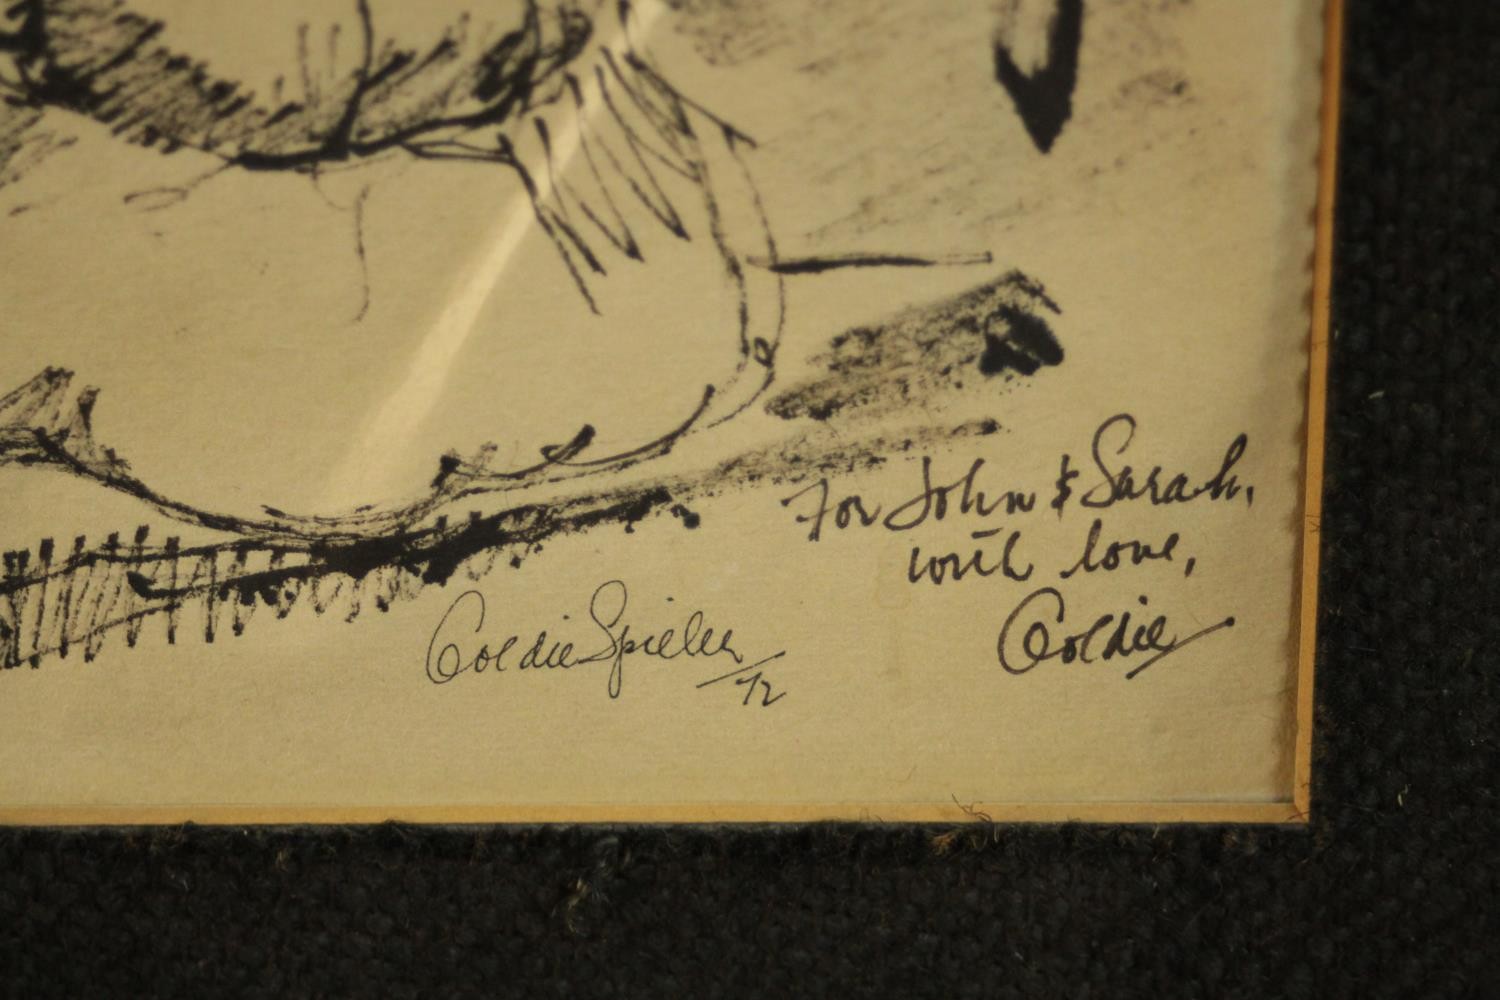 Goldie Spieler, pen and ink sketch of two seated figures, signed, dated and inscribed. H.50 W. - Image 3 of 4